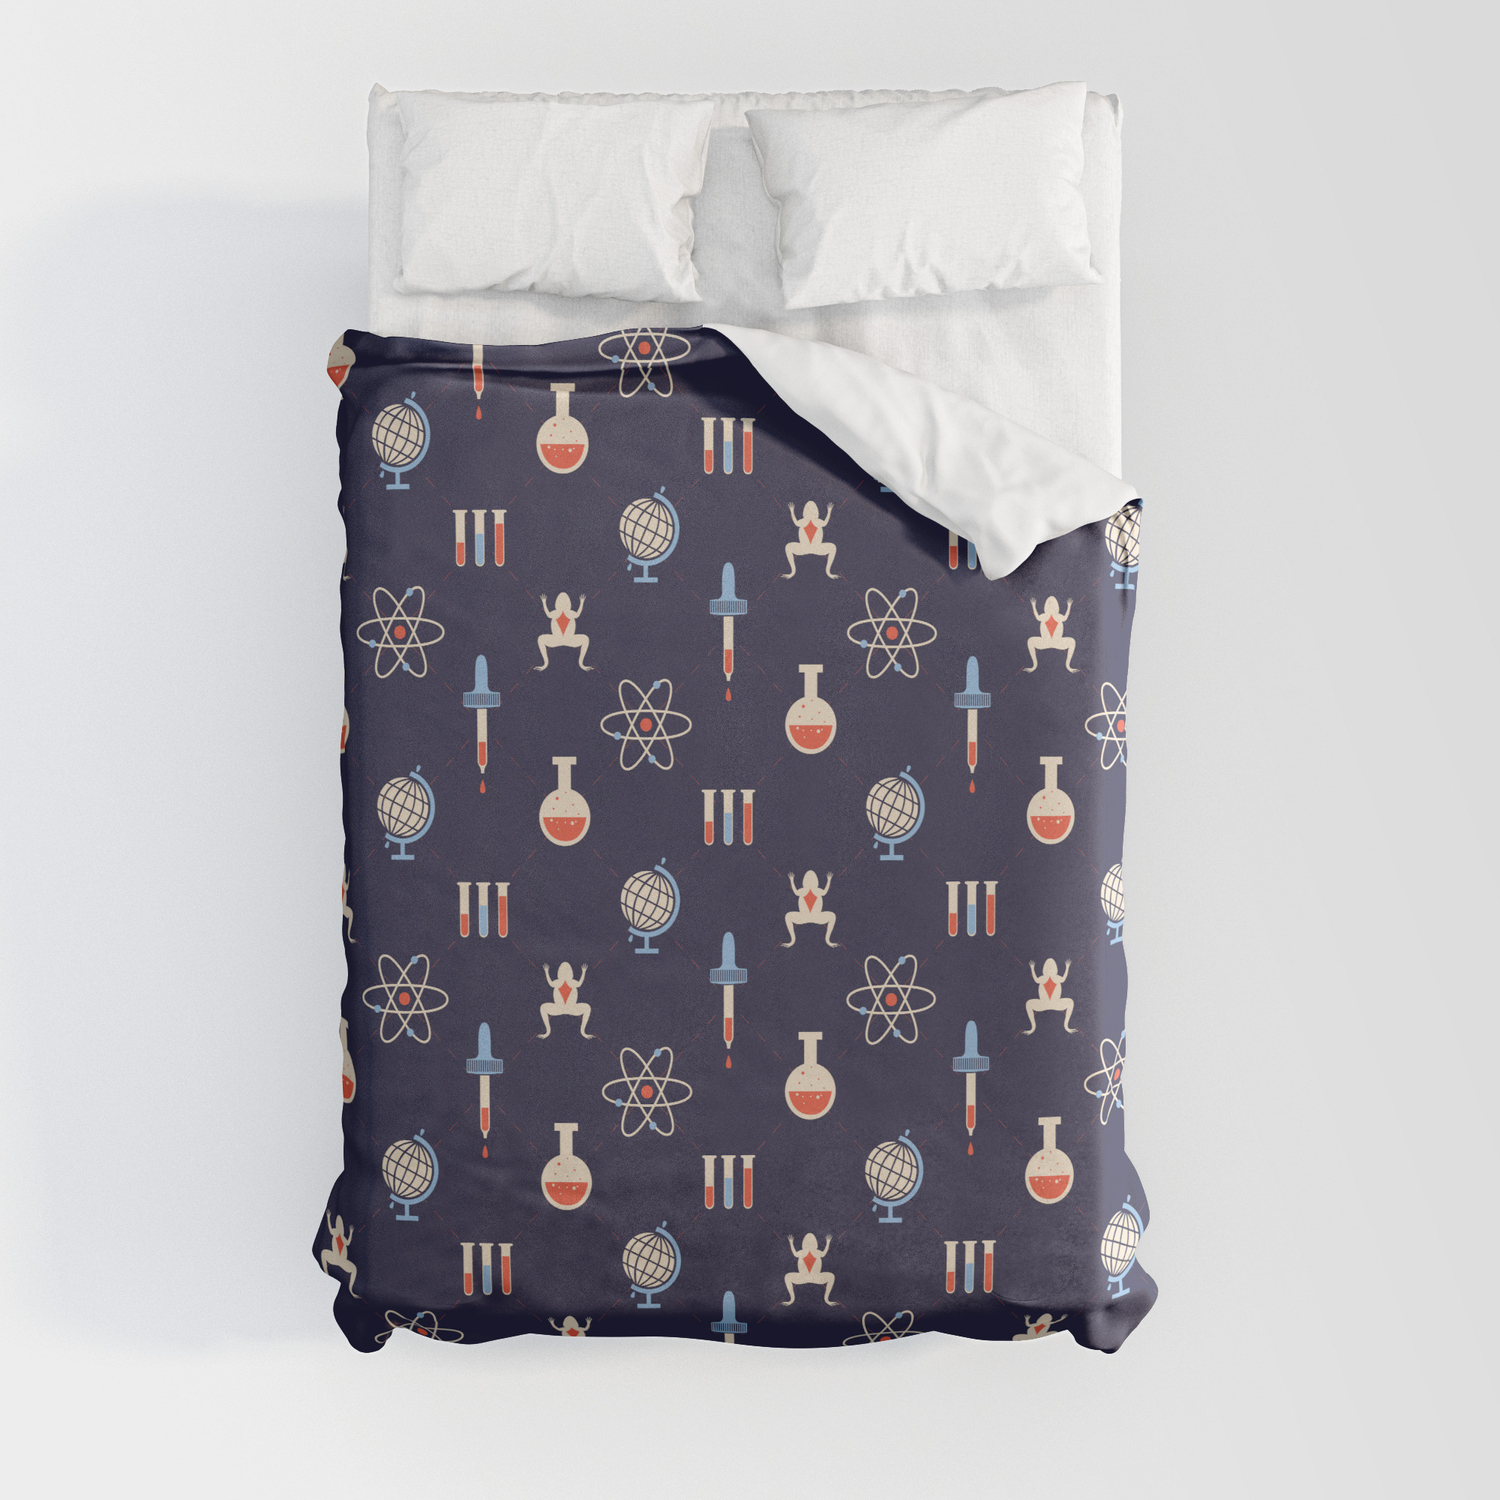 Science Duvet Cover By Wharton Society6, Science Duvet Cover